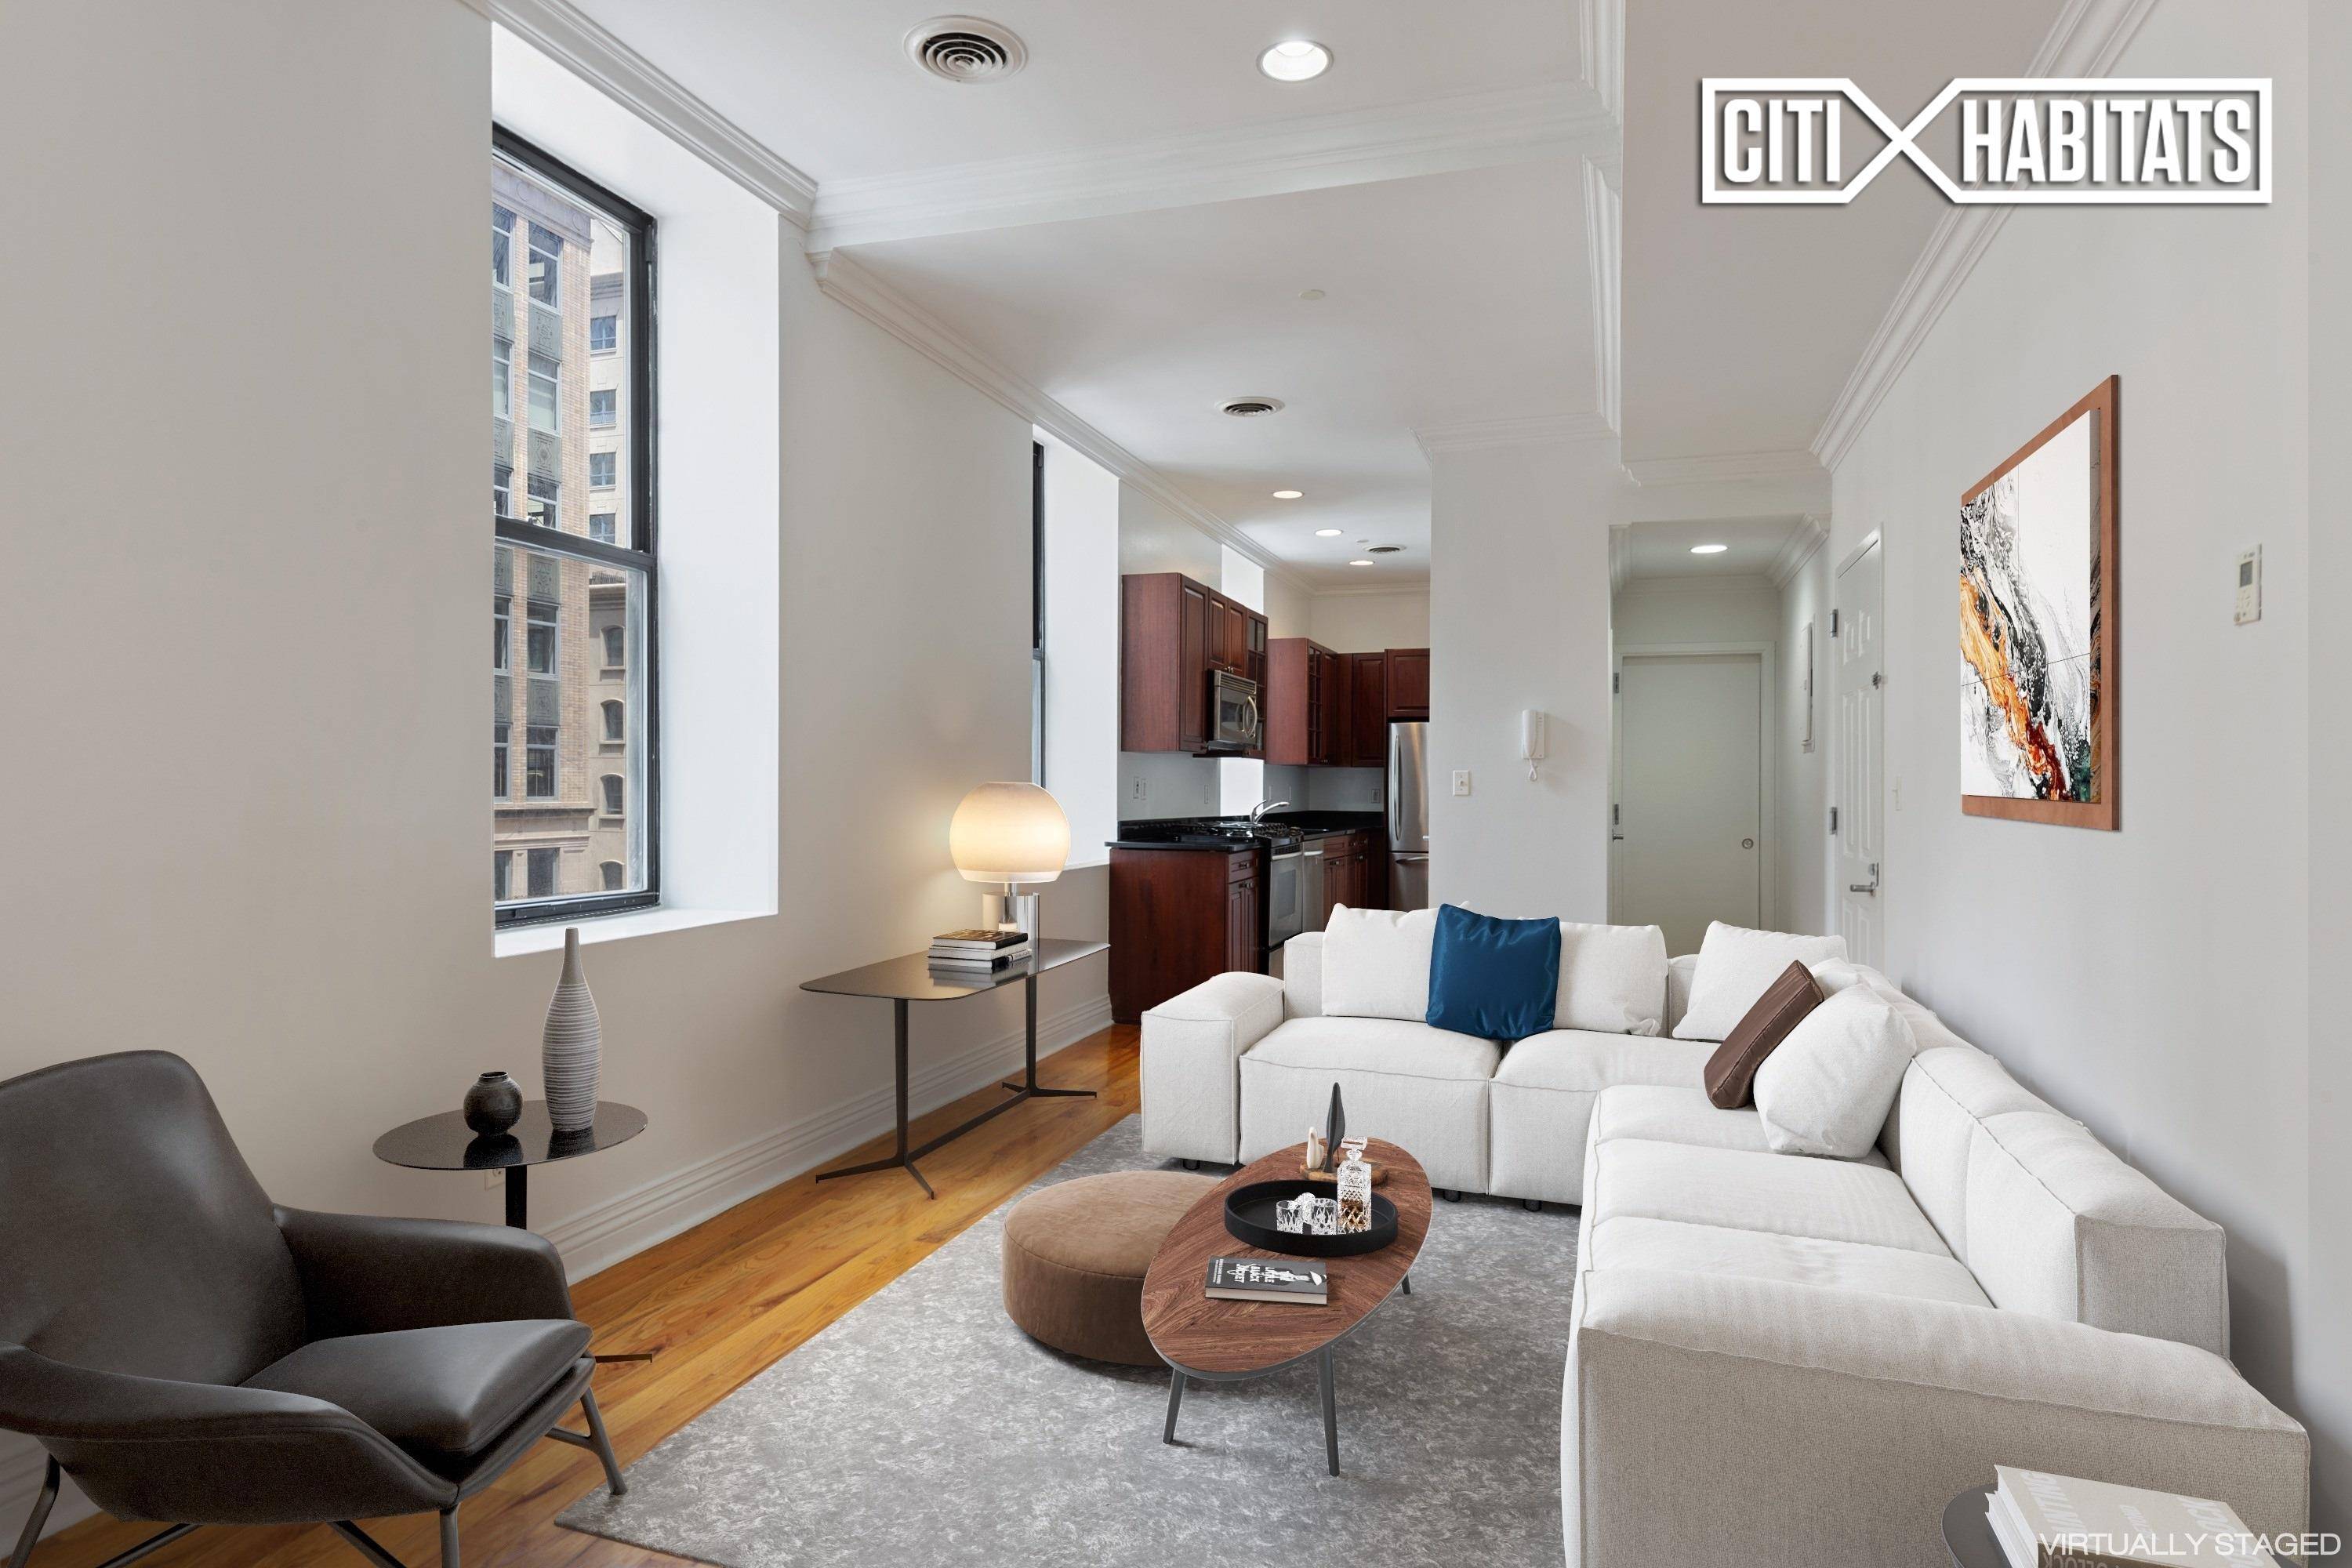 Prime TriBeCa This loft convertible one bedroom apartment offers the ultimate Downtown lifestyle.